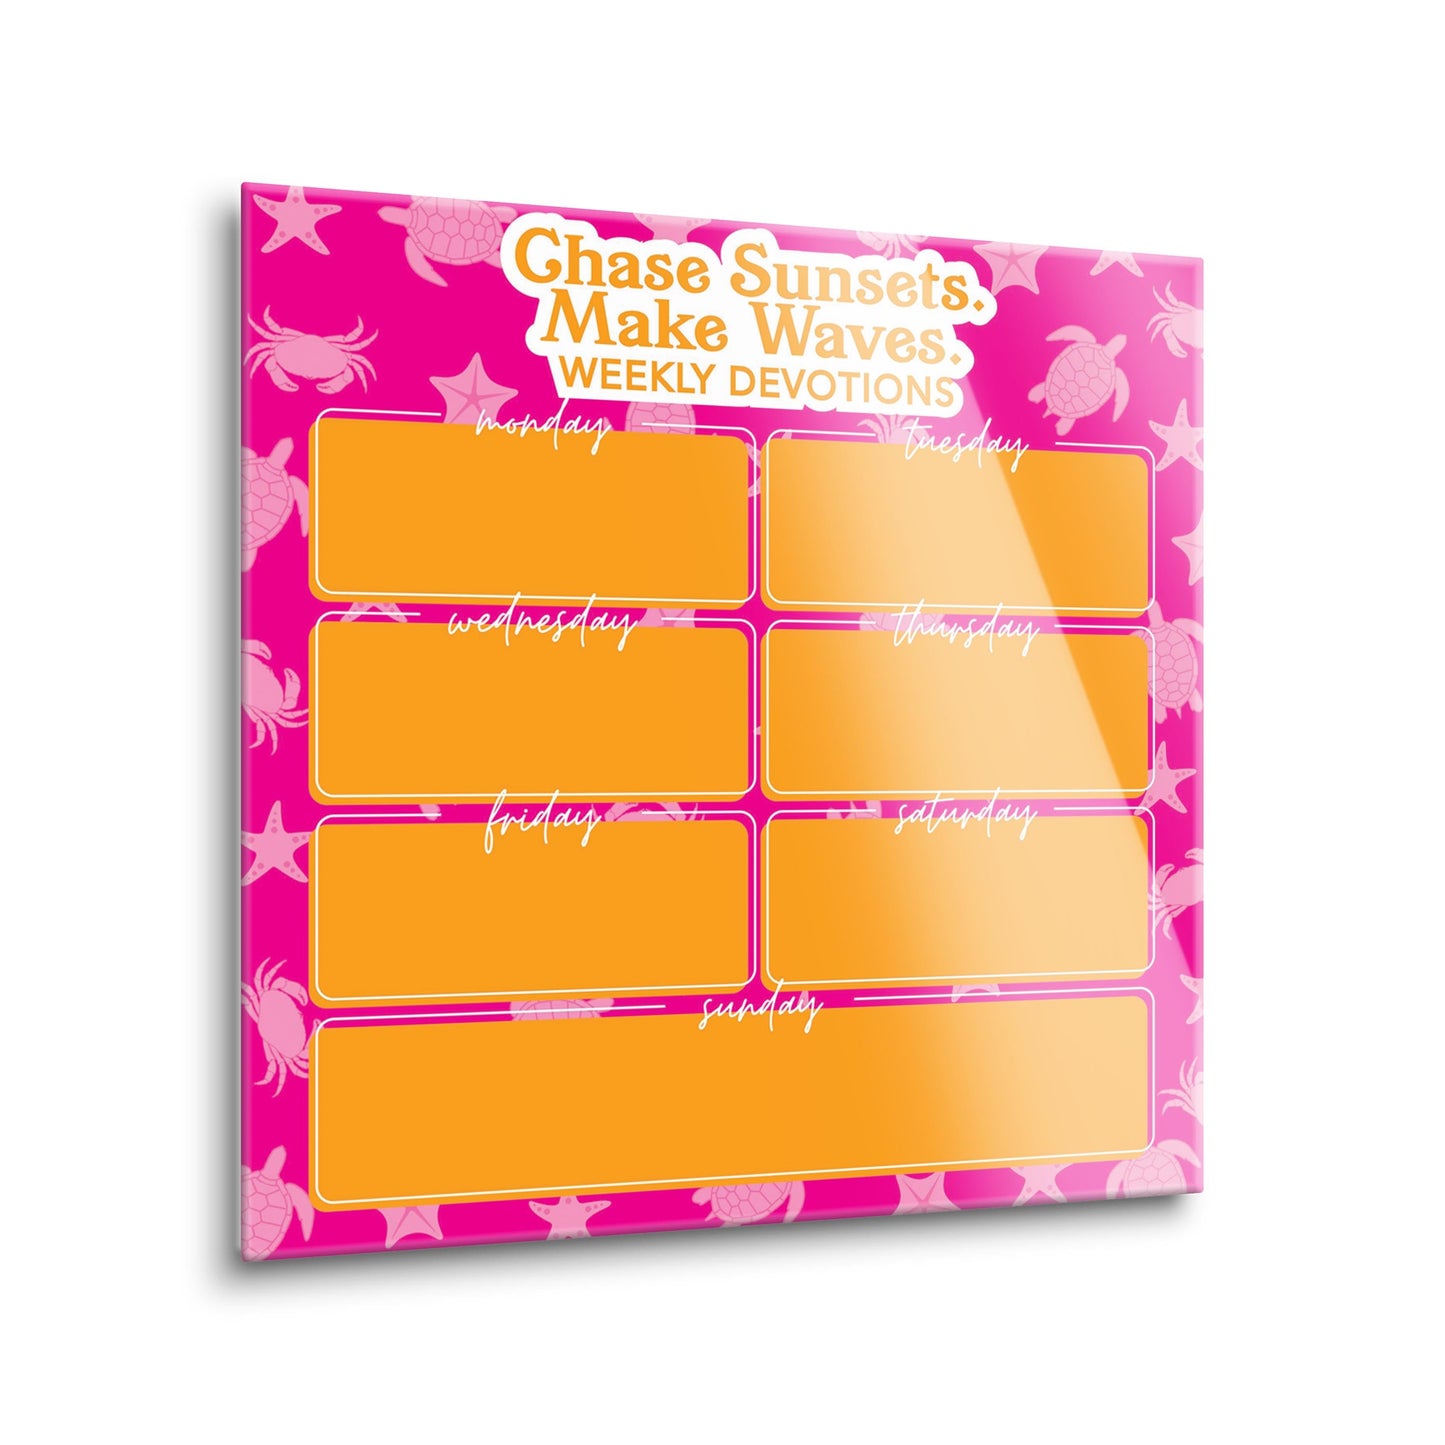 Coastal Chase Sunsets Make Waves Weekly Devotions | 8x8